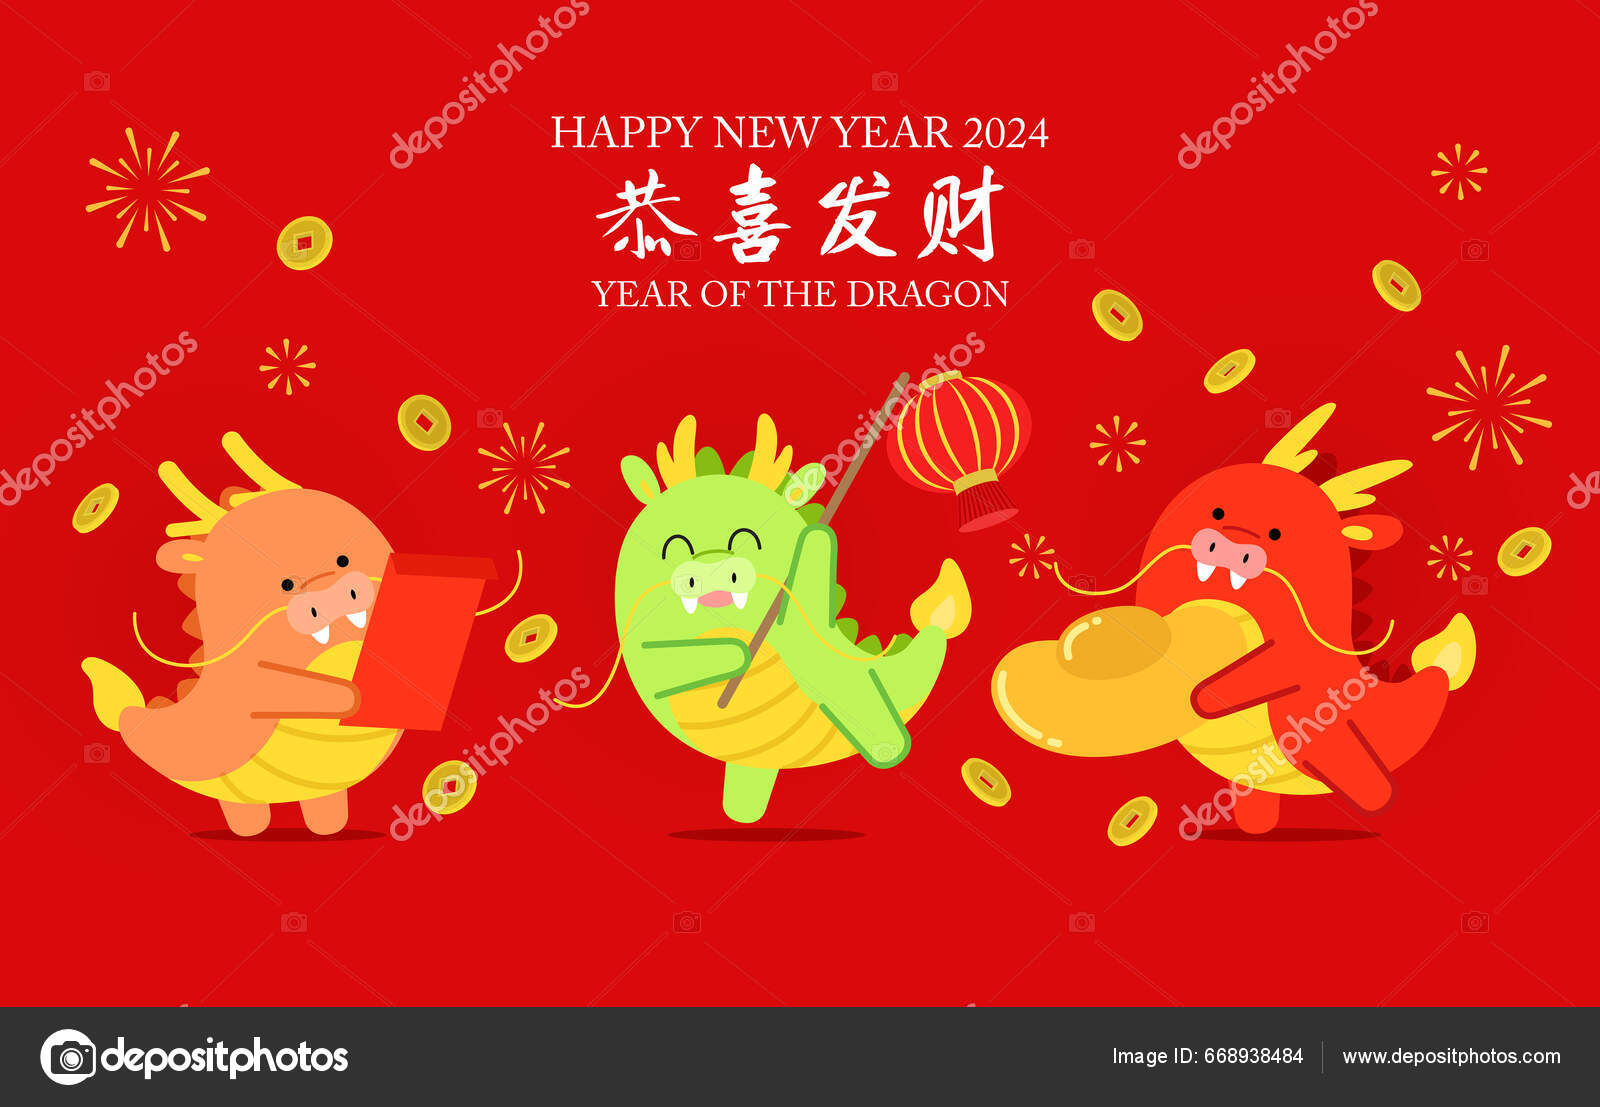 Chinese new year 2024 banner design template Vector Image